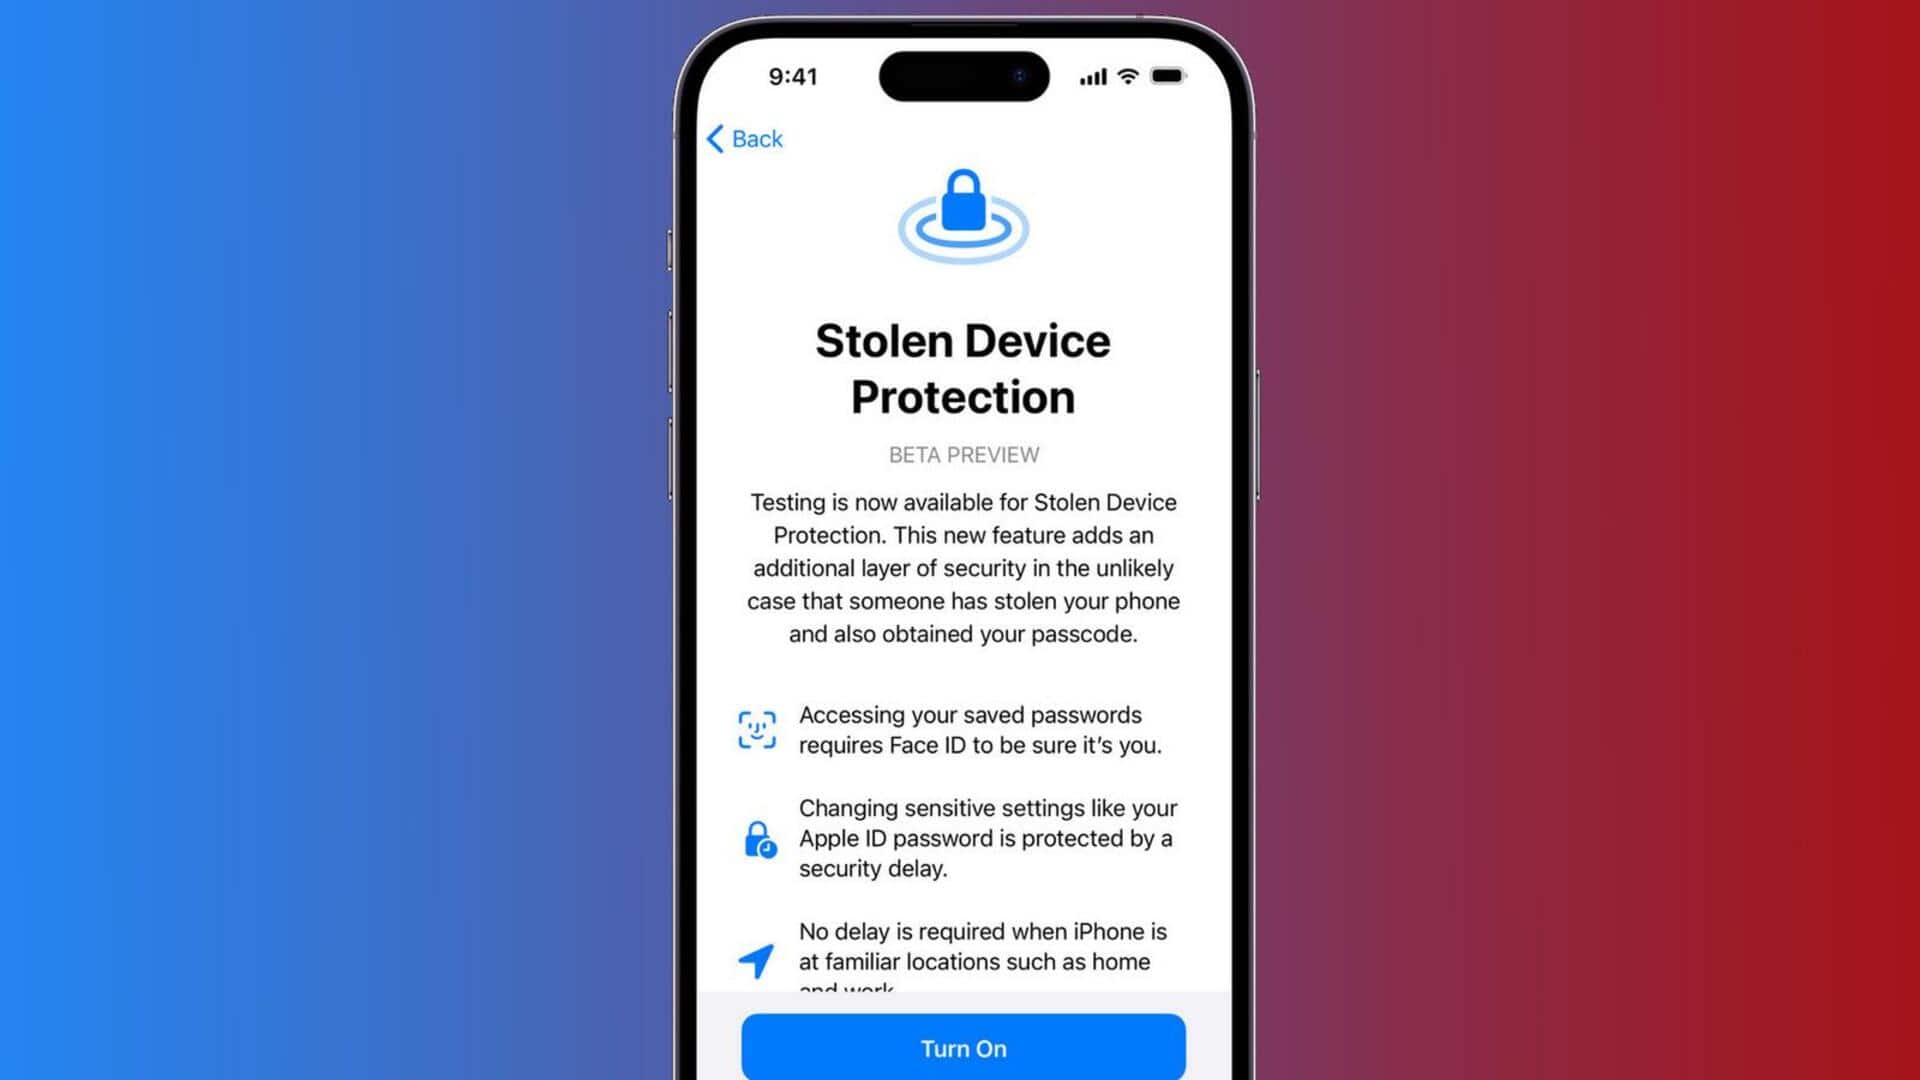 Apple rolls out iOS 17.3 update with Stolen Device Protection